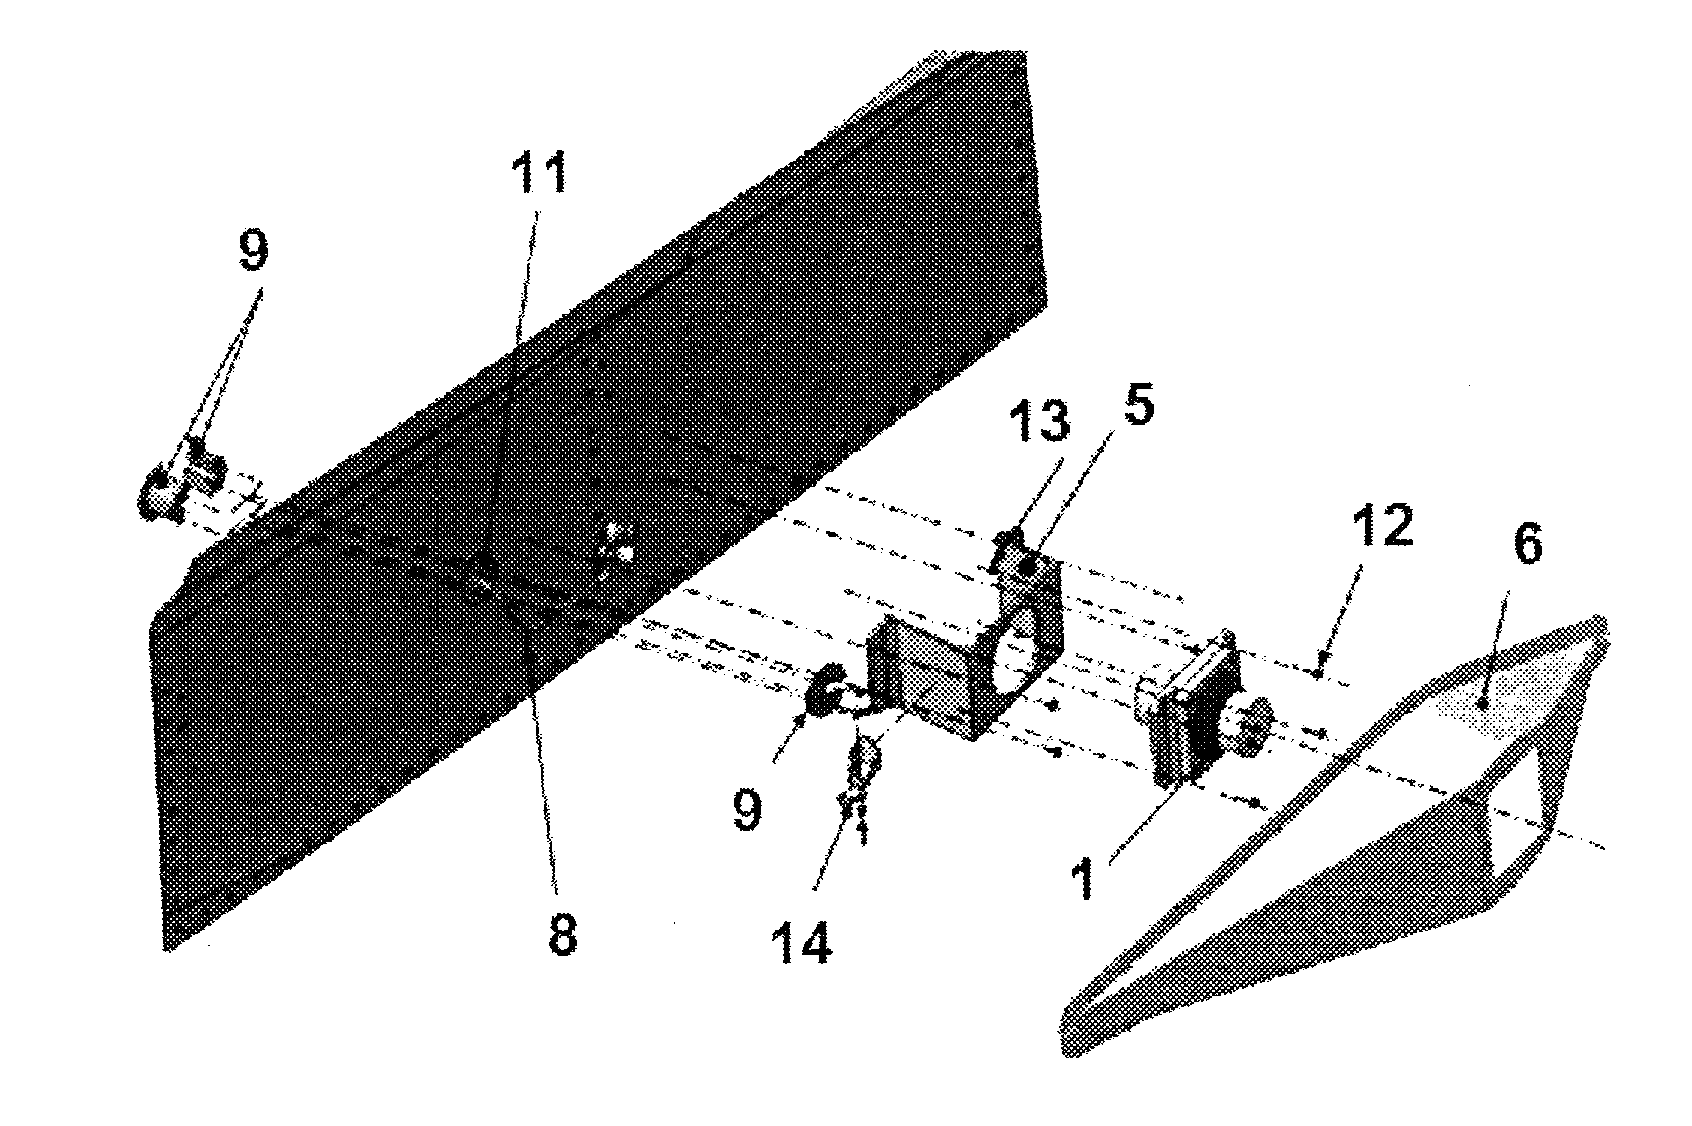 Camera support device